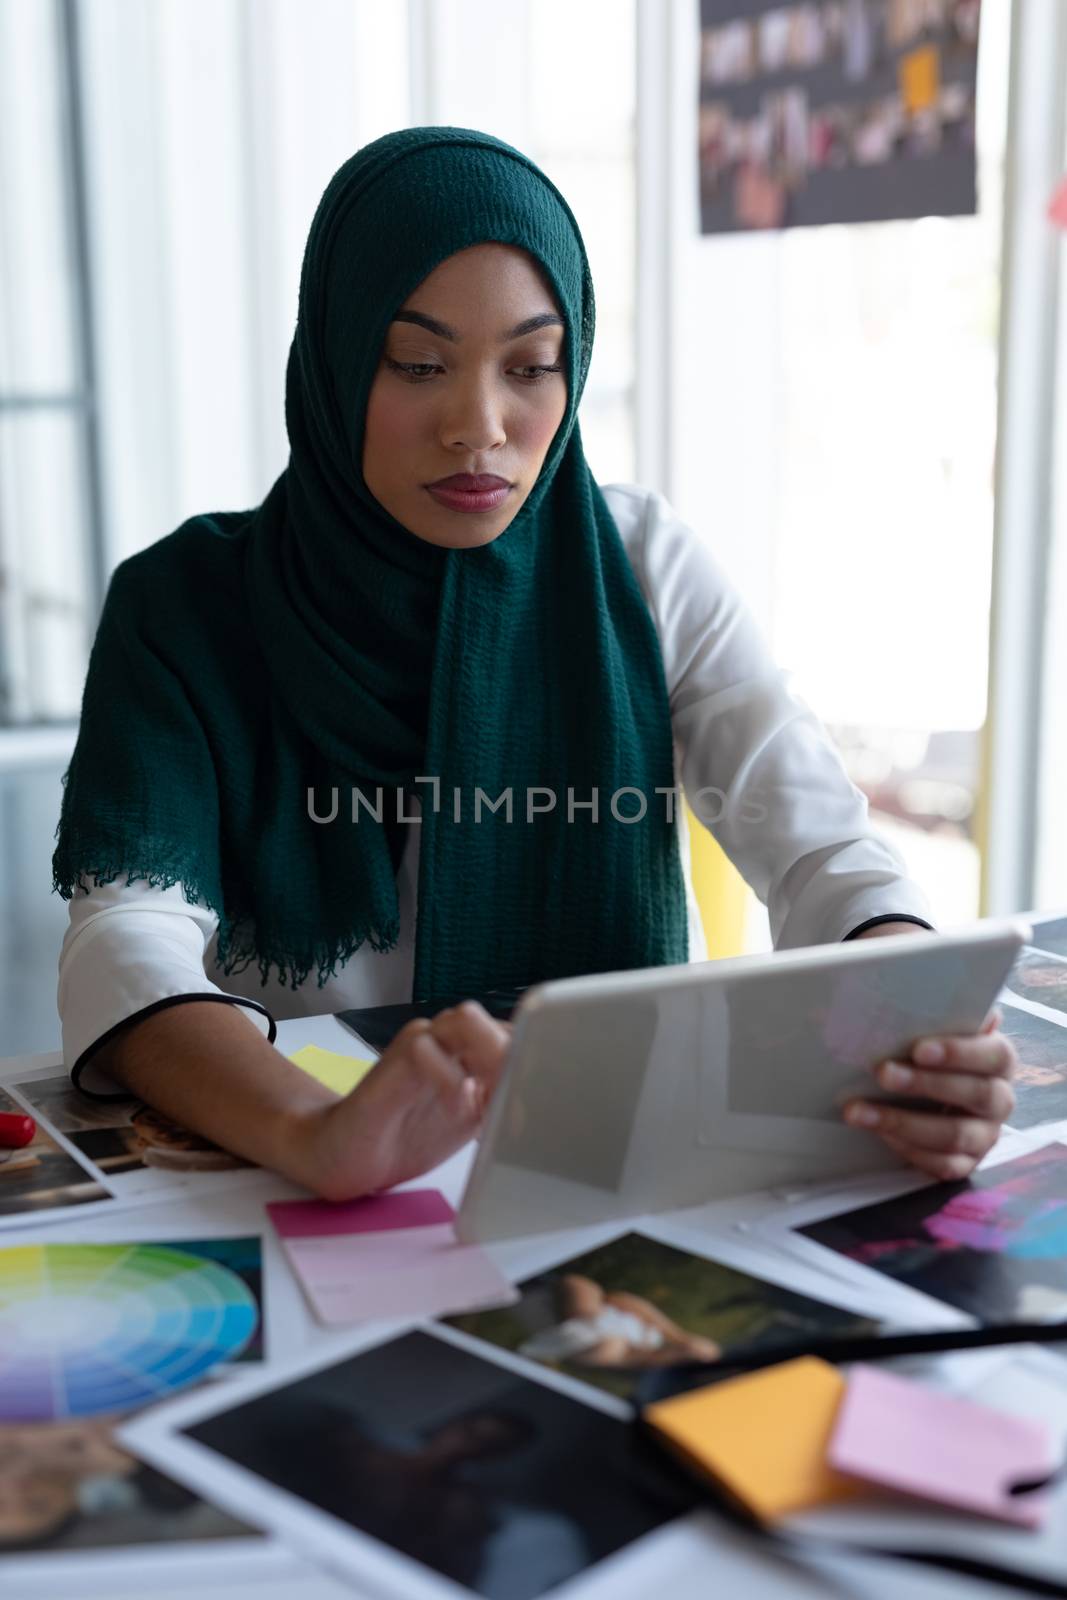 Portrait of mixed race female graphic designer in hijab using digital tablet at desk in office. This is a casual creative start-up business office for a diverse team